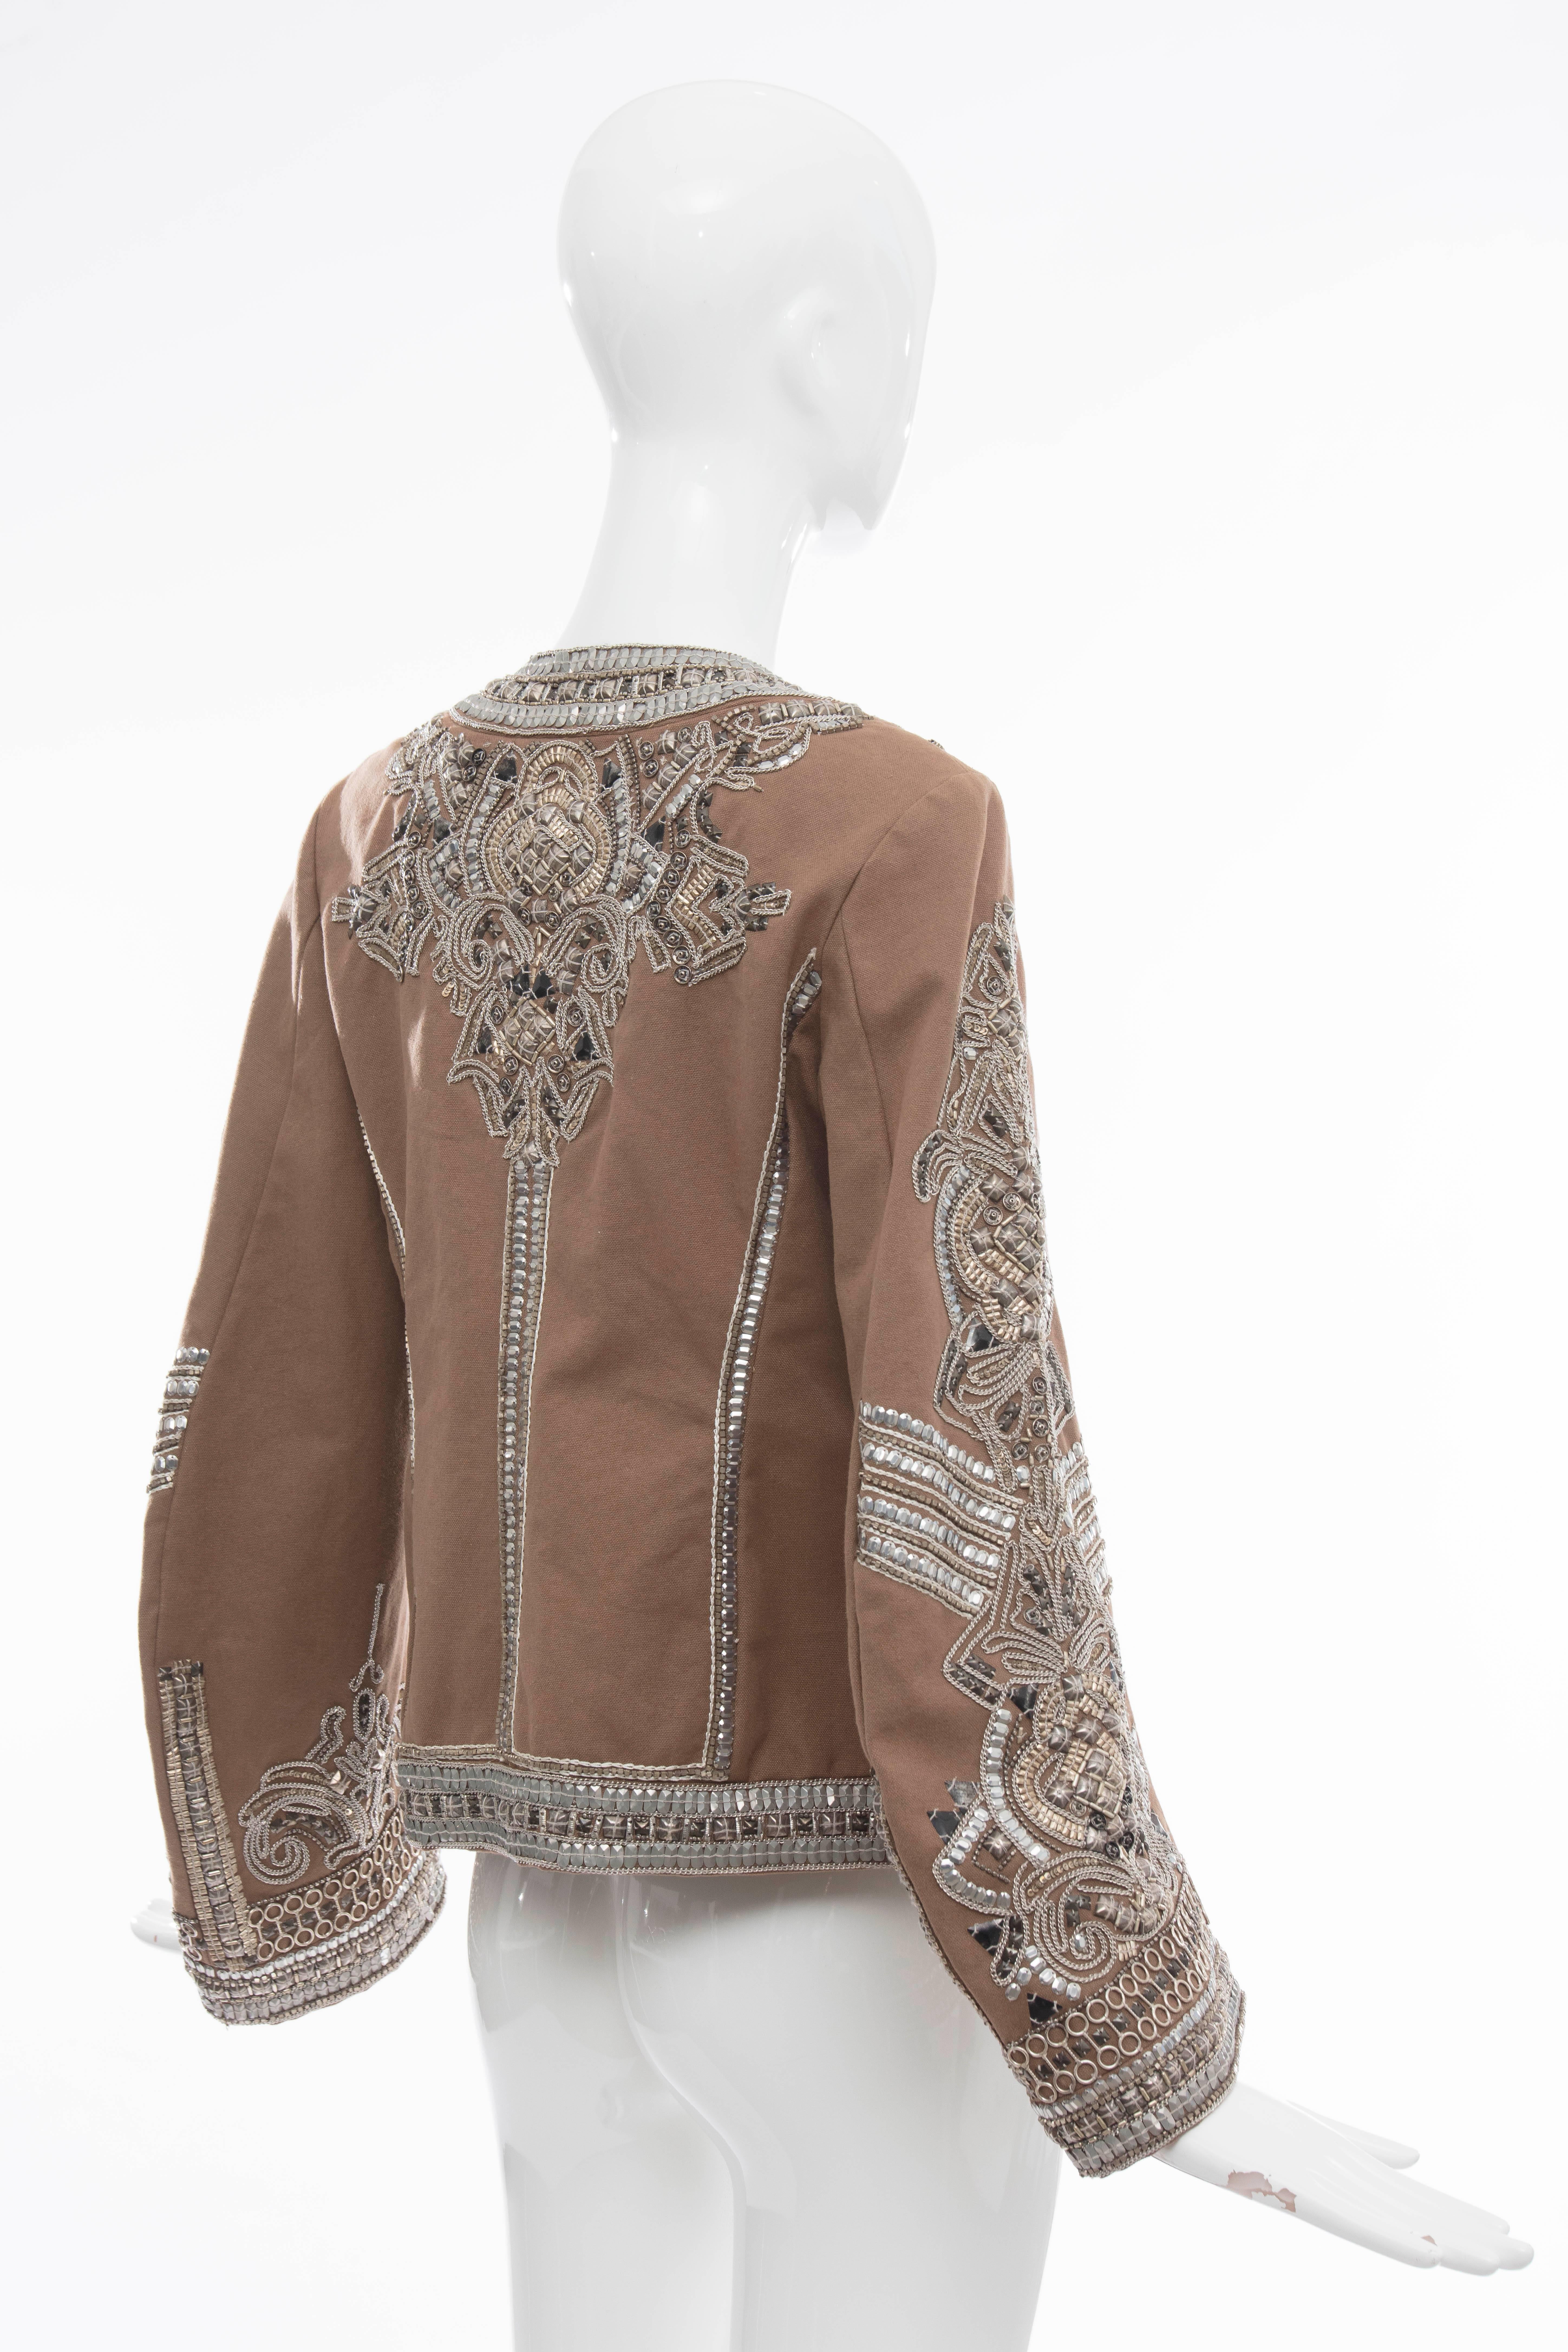 Dries Van Noten Cotton Embroidered Jacket With Silver Indian Thread, Fall 2010 In Excellent Condition For Sale In Cincinnati, OH